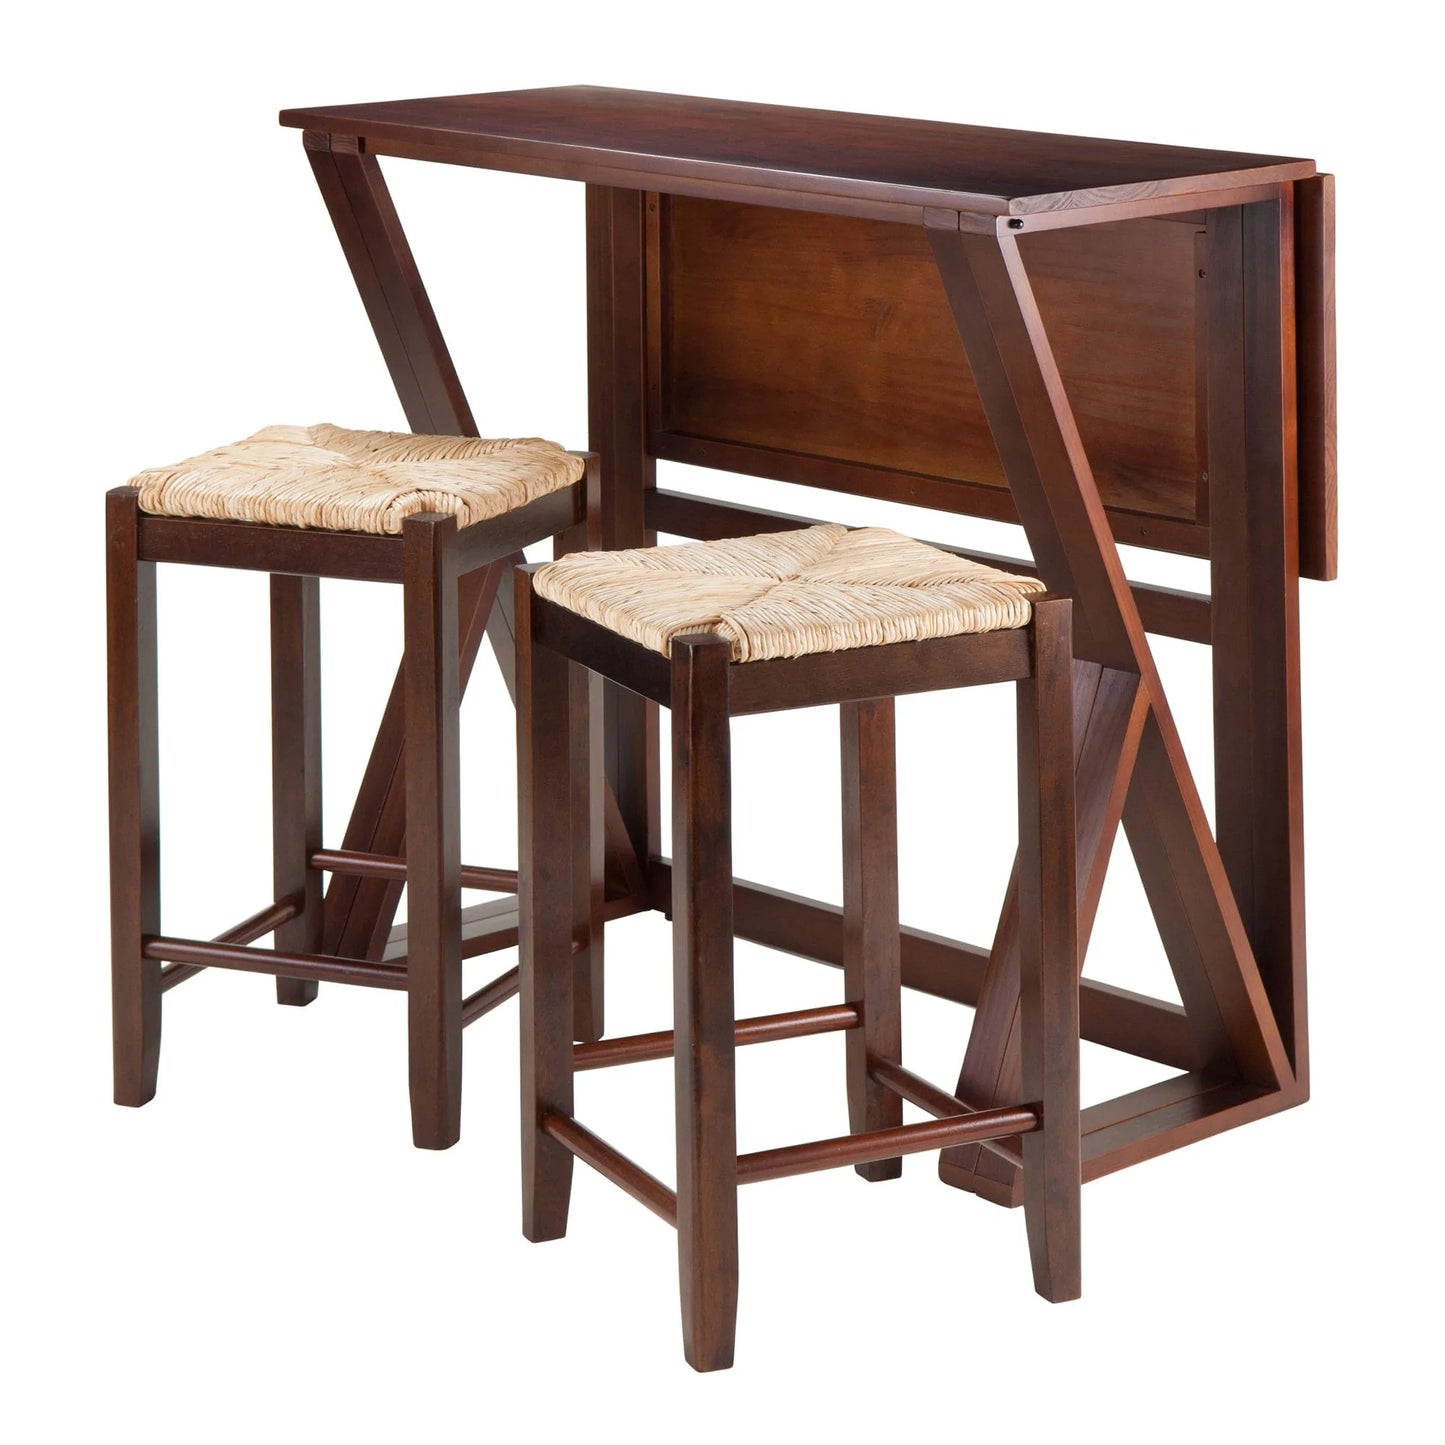 WINSOME Pub Table Set Harrington 3-Pc Drop Leaf Table with Rush Seat Counter Stools, Walnut